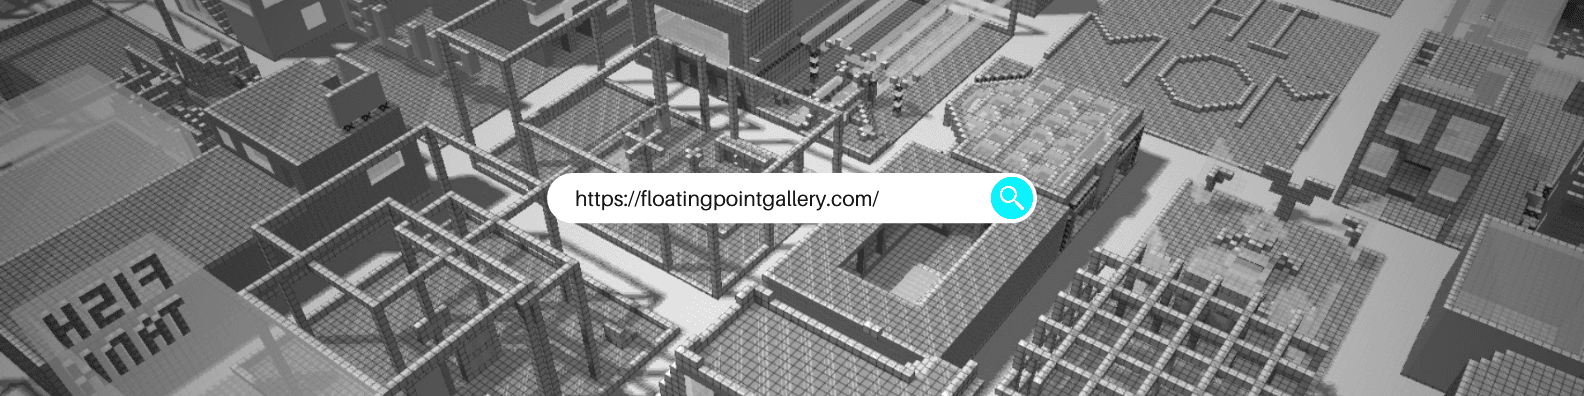 Floating_Point_Gallery banner